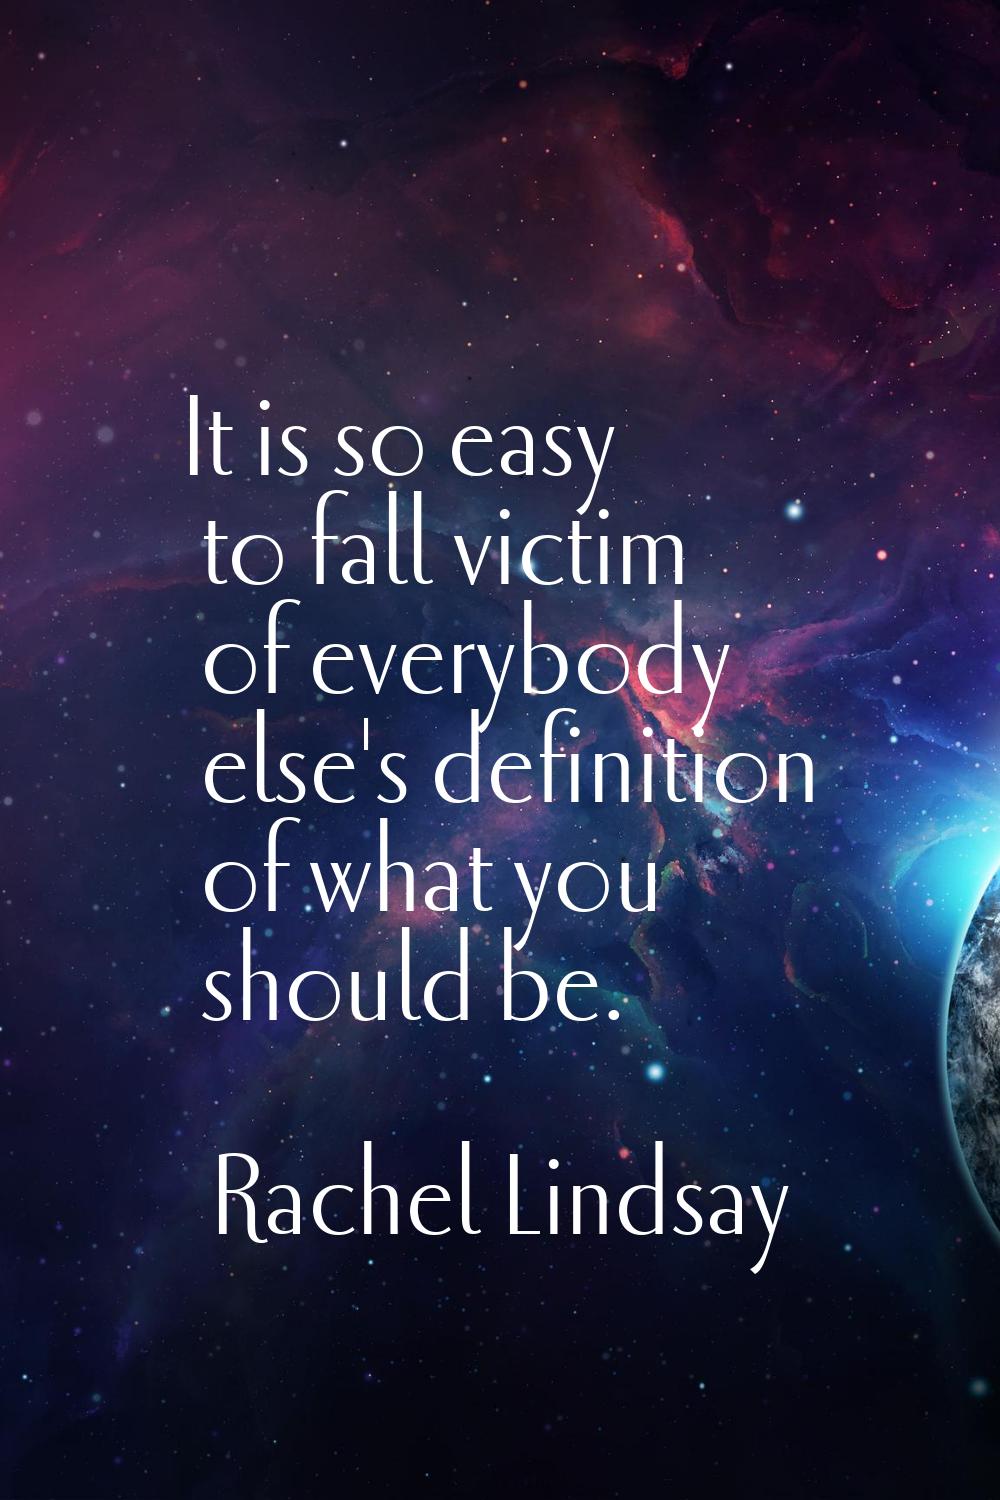 It is so easy to fall victim of everybody else's definition of what you should be.